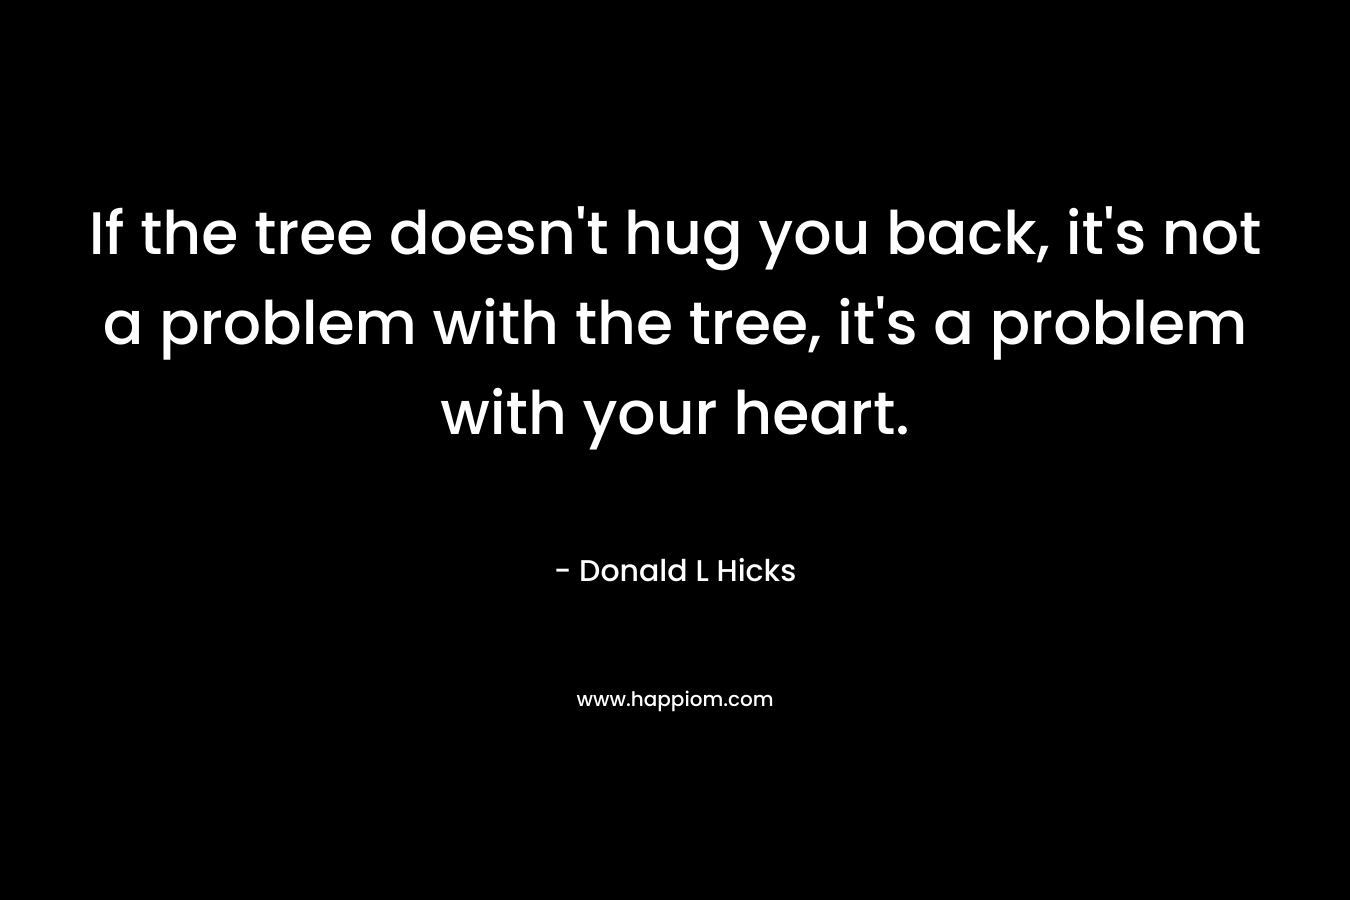 If the tree doesn't hug you back, it's not a problem with the tree, it's a problem with your heart.